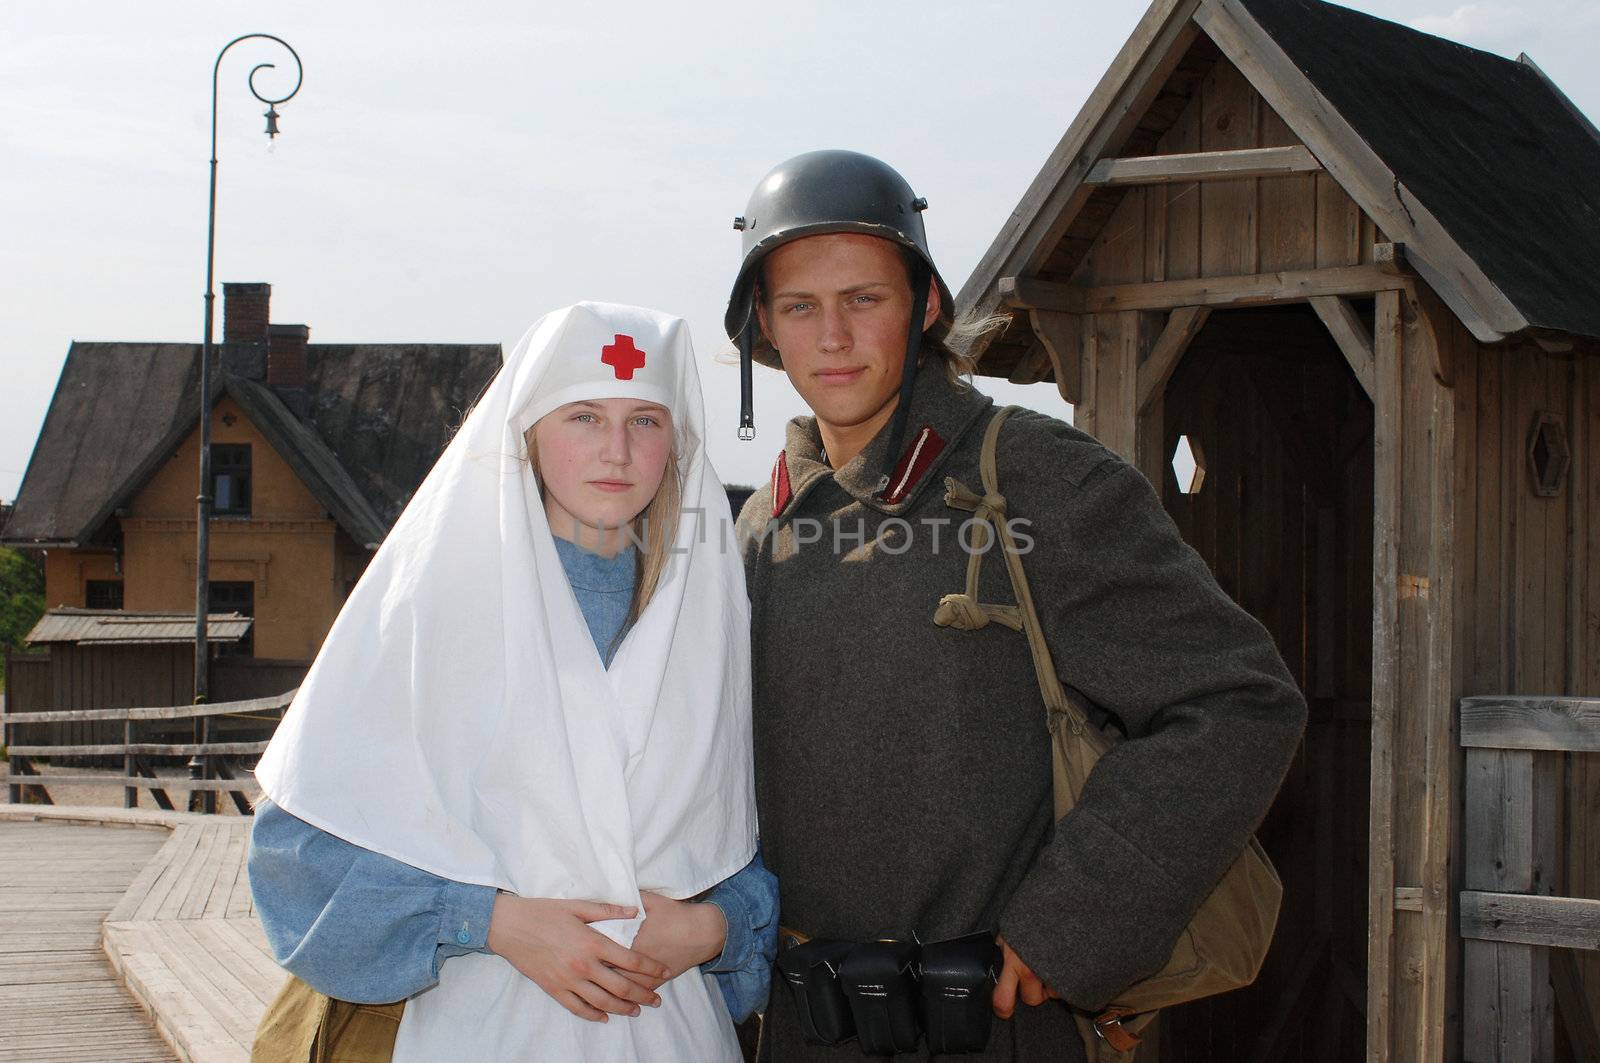 Retro styled picture with nurse and soldier by fotorobs